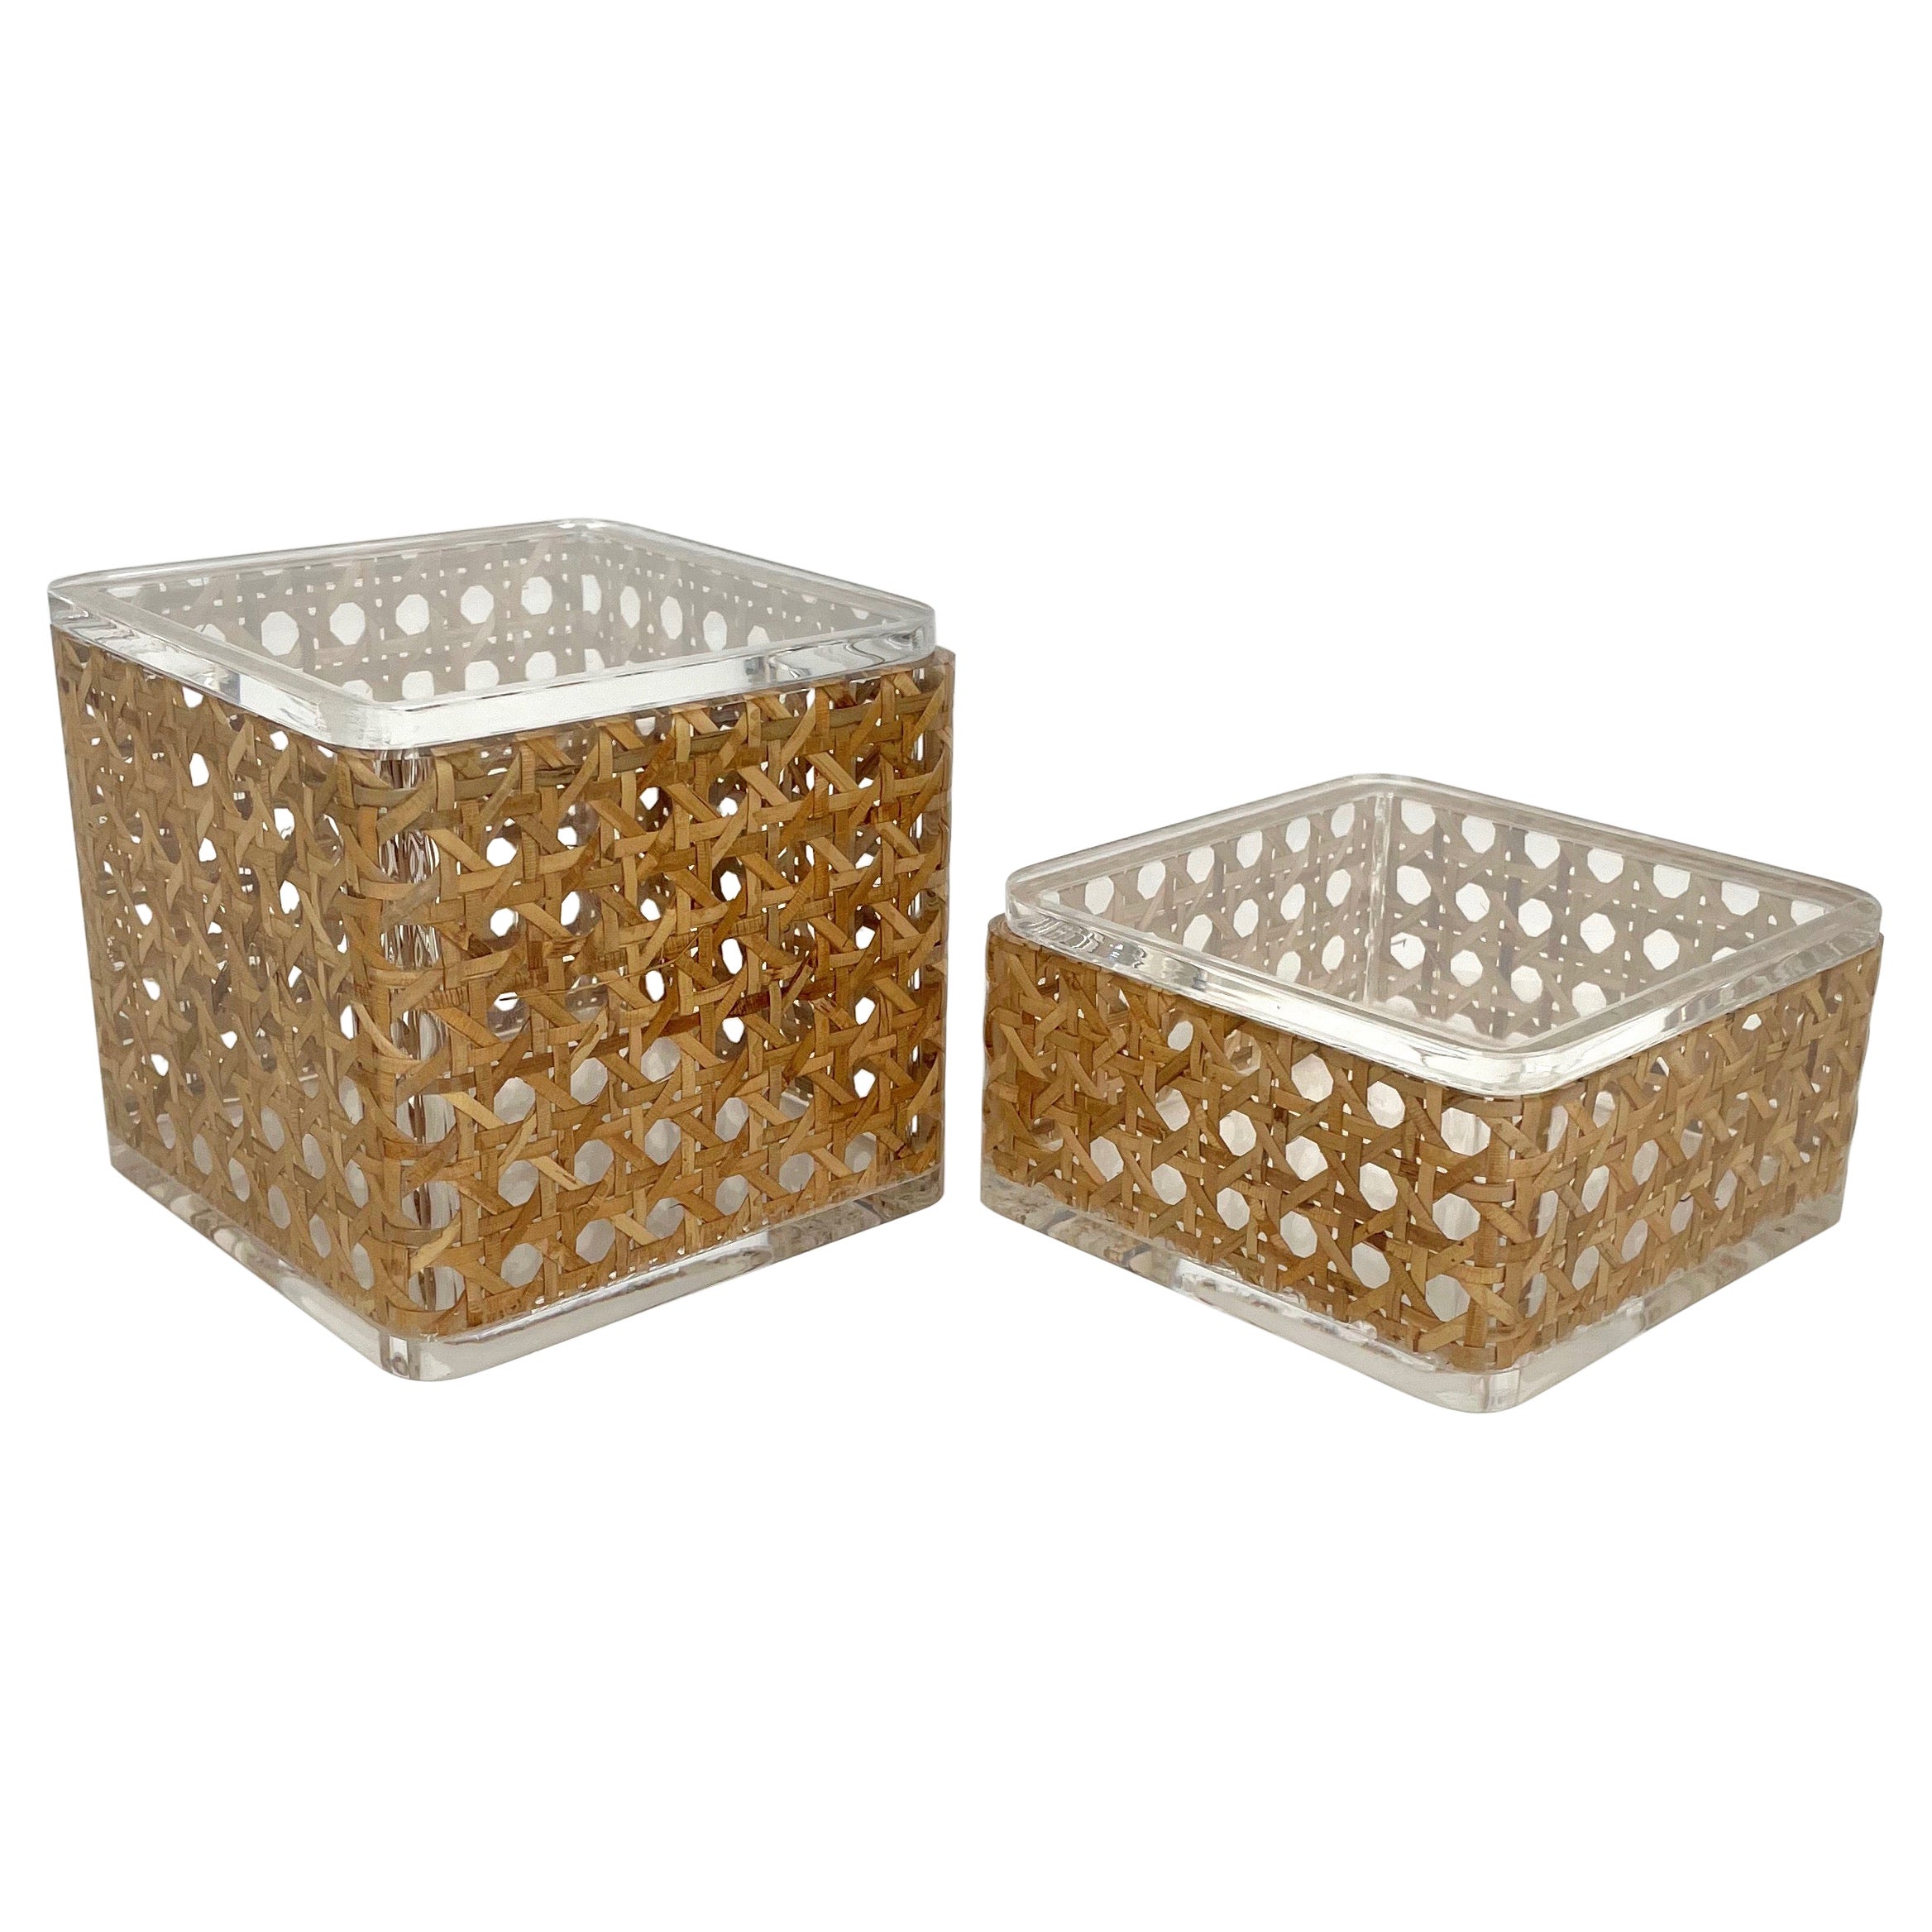 Pair of Box in Lucite & Rattan Christian Dior Home Style, Italy, 1970s